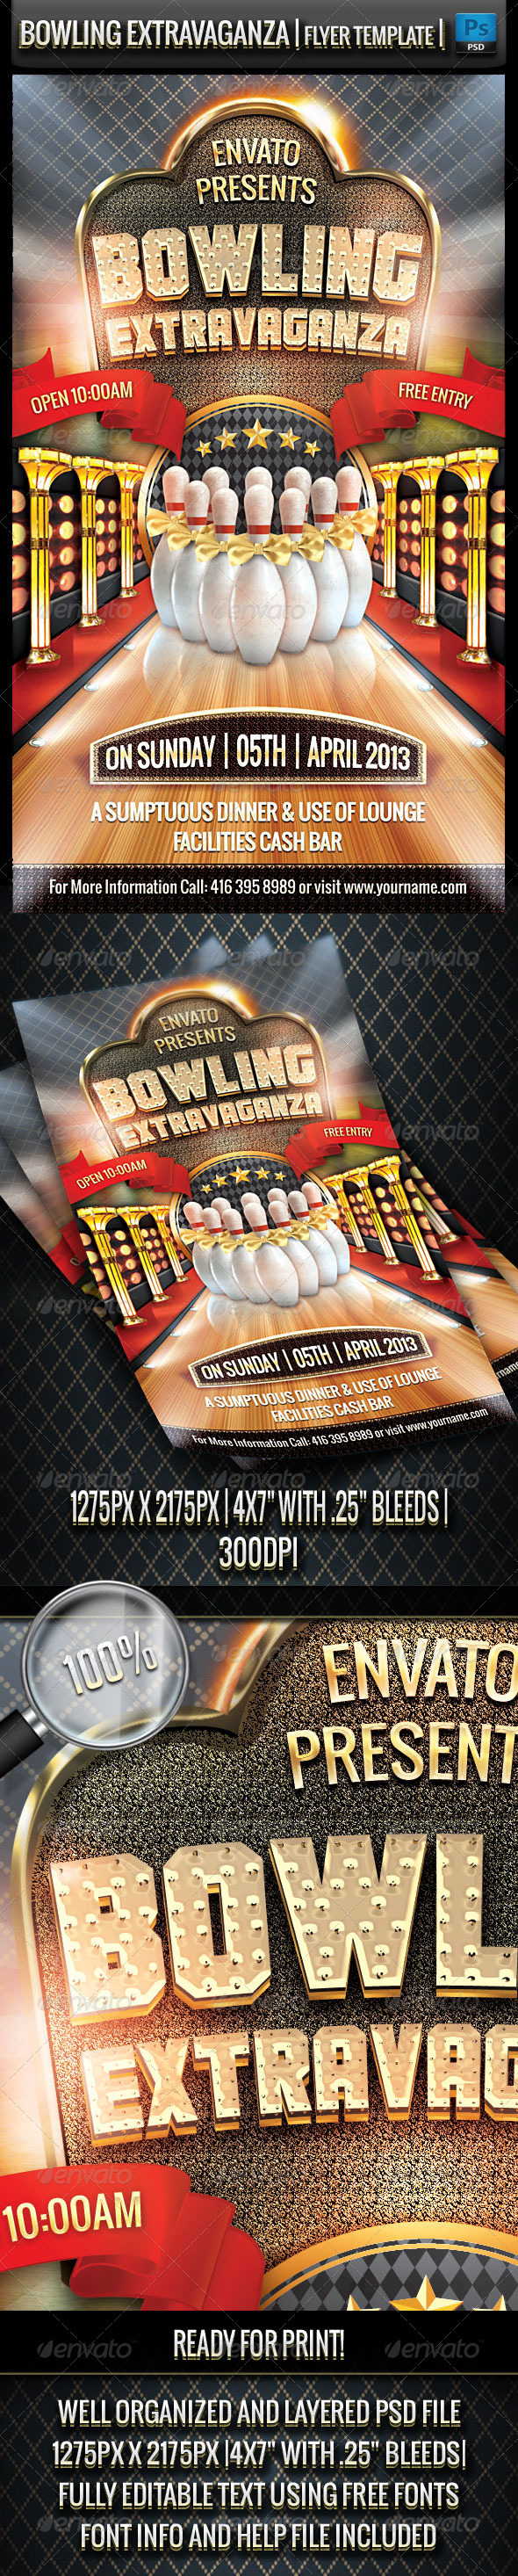 Bowling Extravaganza Flyer Template